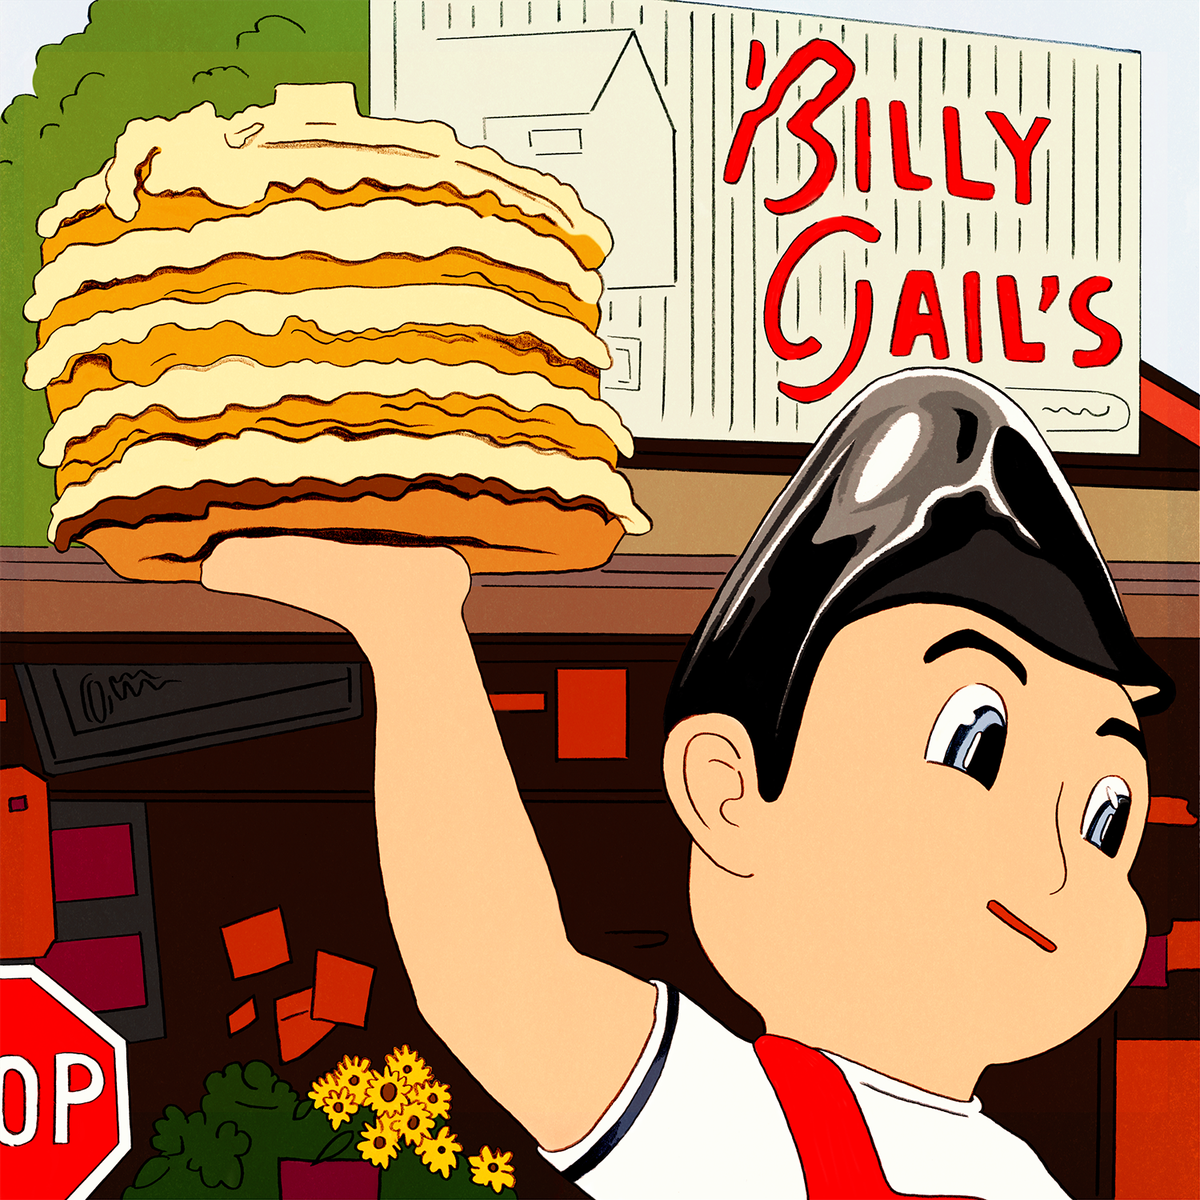 The statue standing in front of Billy Gail’s advertises the restaurant’s towering stacks of fluffy pancakes. In the background, the restaurant looks warm and inviting.